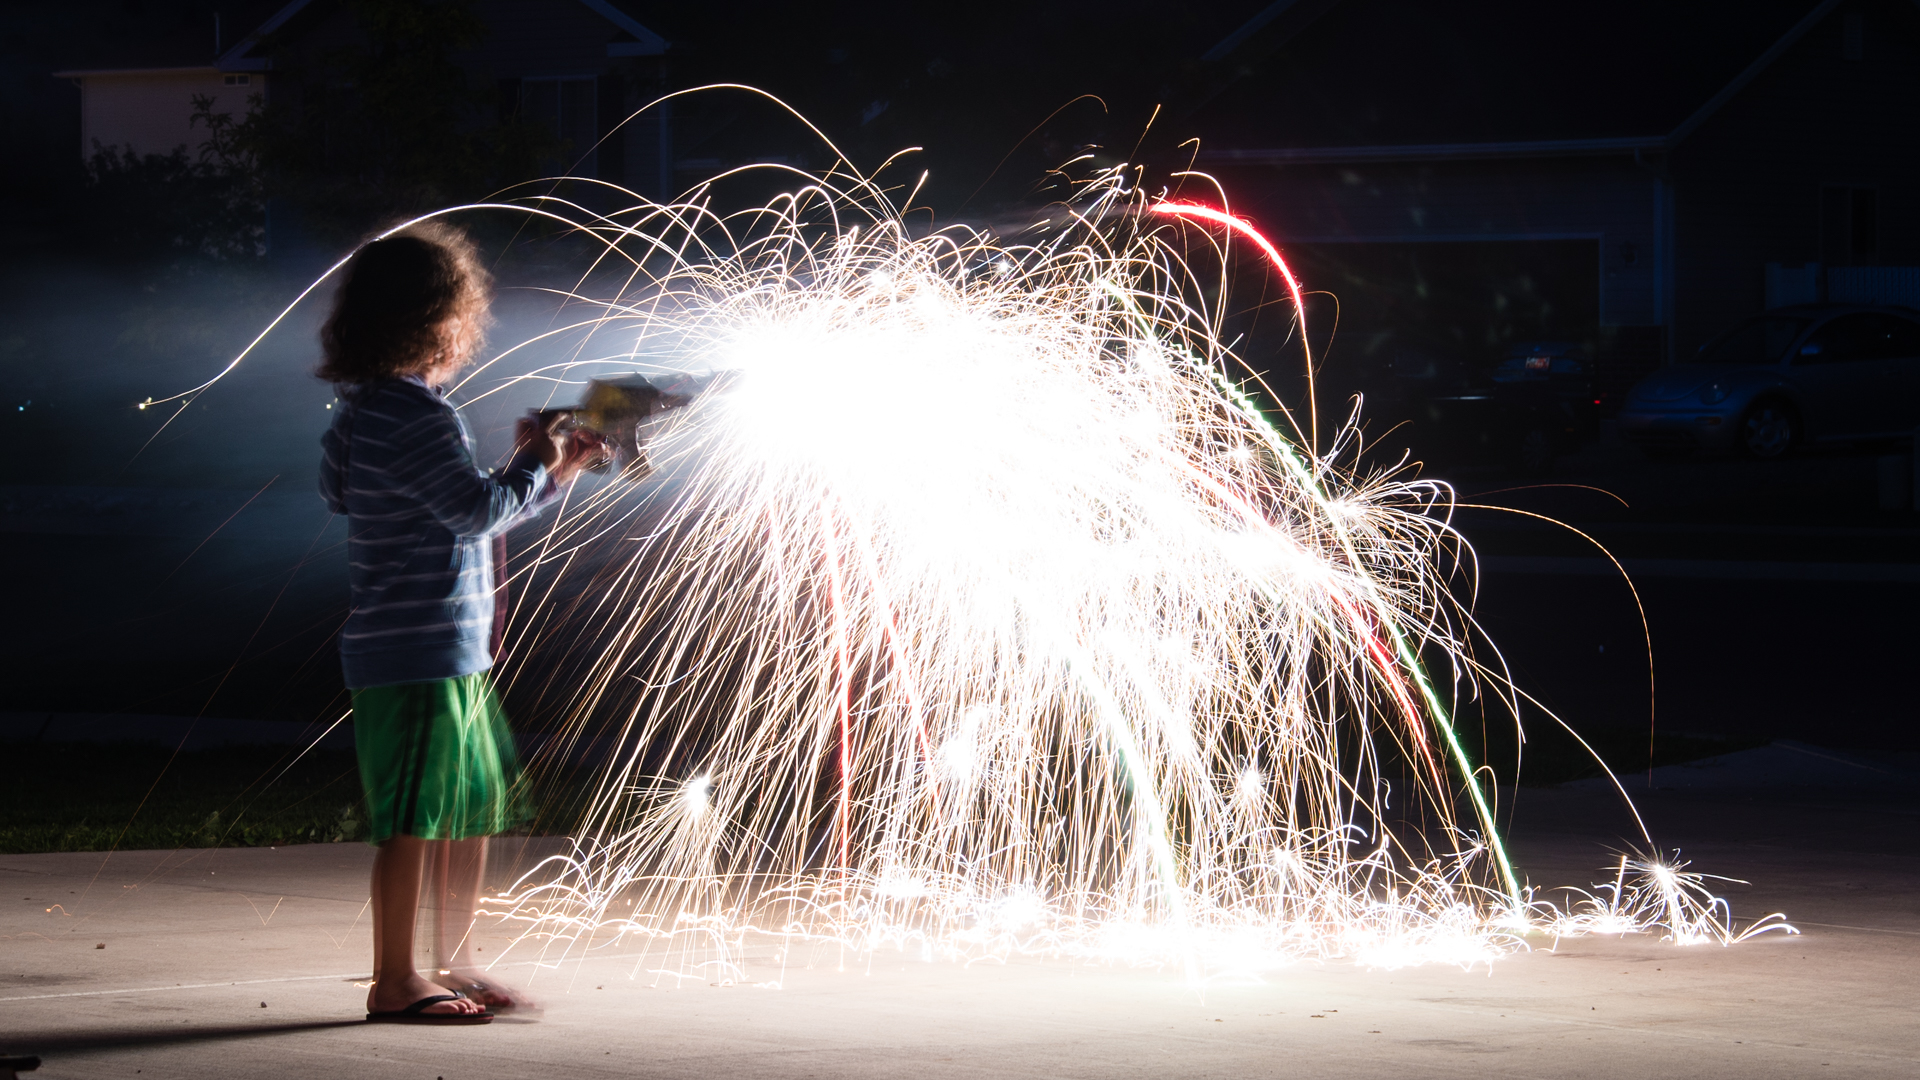 Kids with sparklers is a great way to test exposure before the big fireworks display